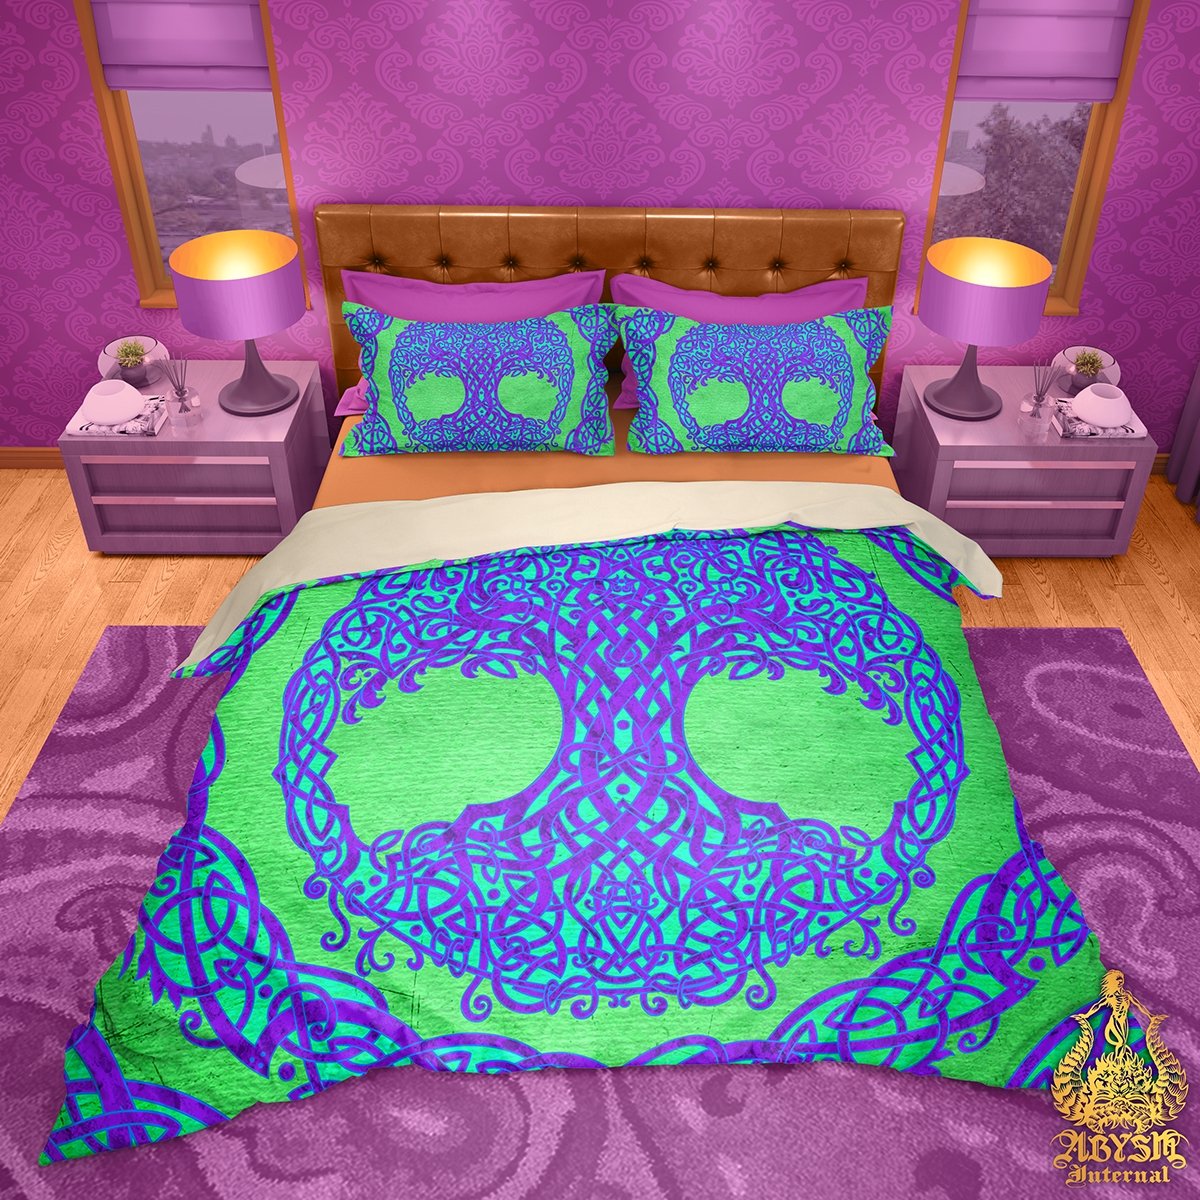 Tree of Life Bedding Set, Comforter and Duvet, Indie Bed Cover, Wiccan Bedroom Decor King, Queen and Twin Size - Celtic, Psy, Green and Purple - Abysm Internal